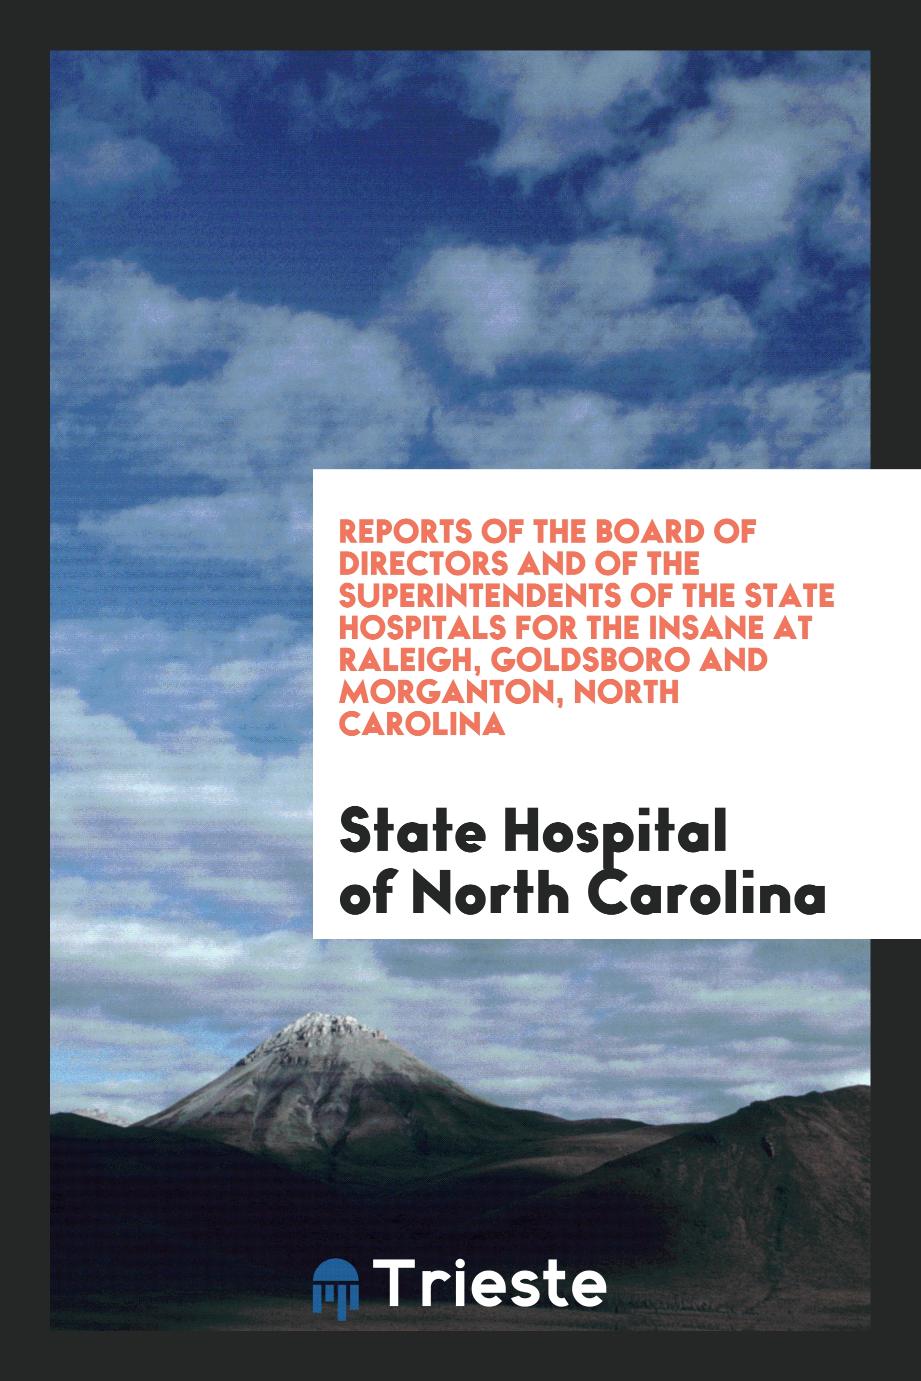 Reports of the Board of Directors and of the Superintendents of the State Hospitals for the Insane at Raleigh, Goldsboro and Morganton, North Carolina